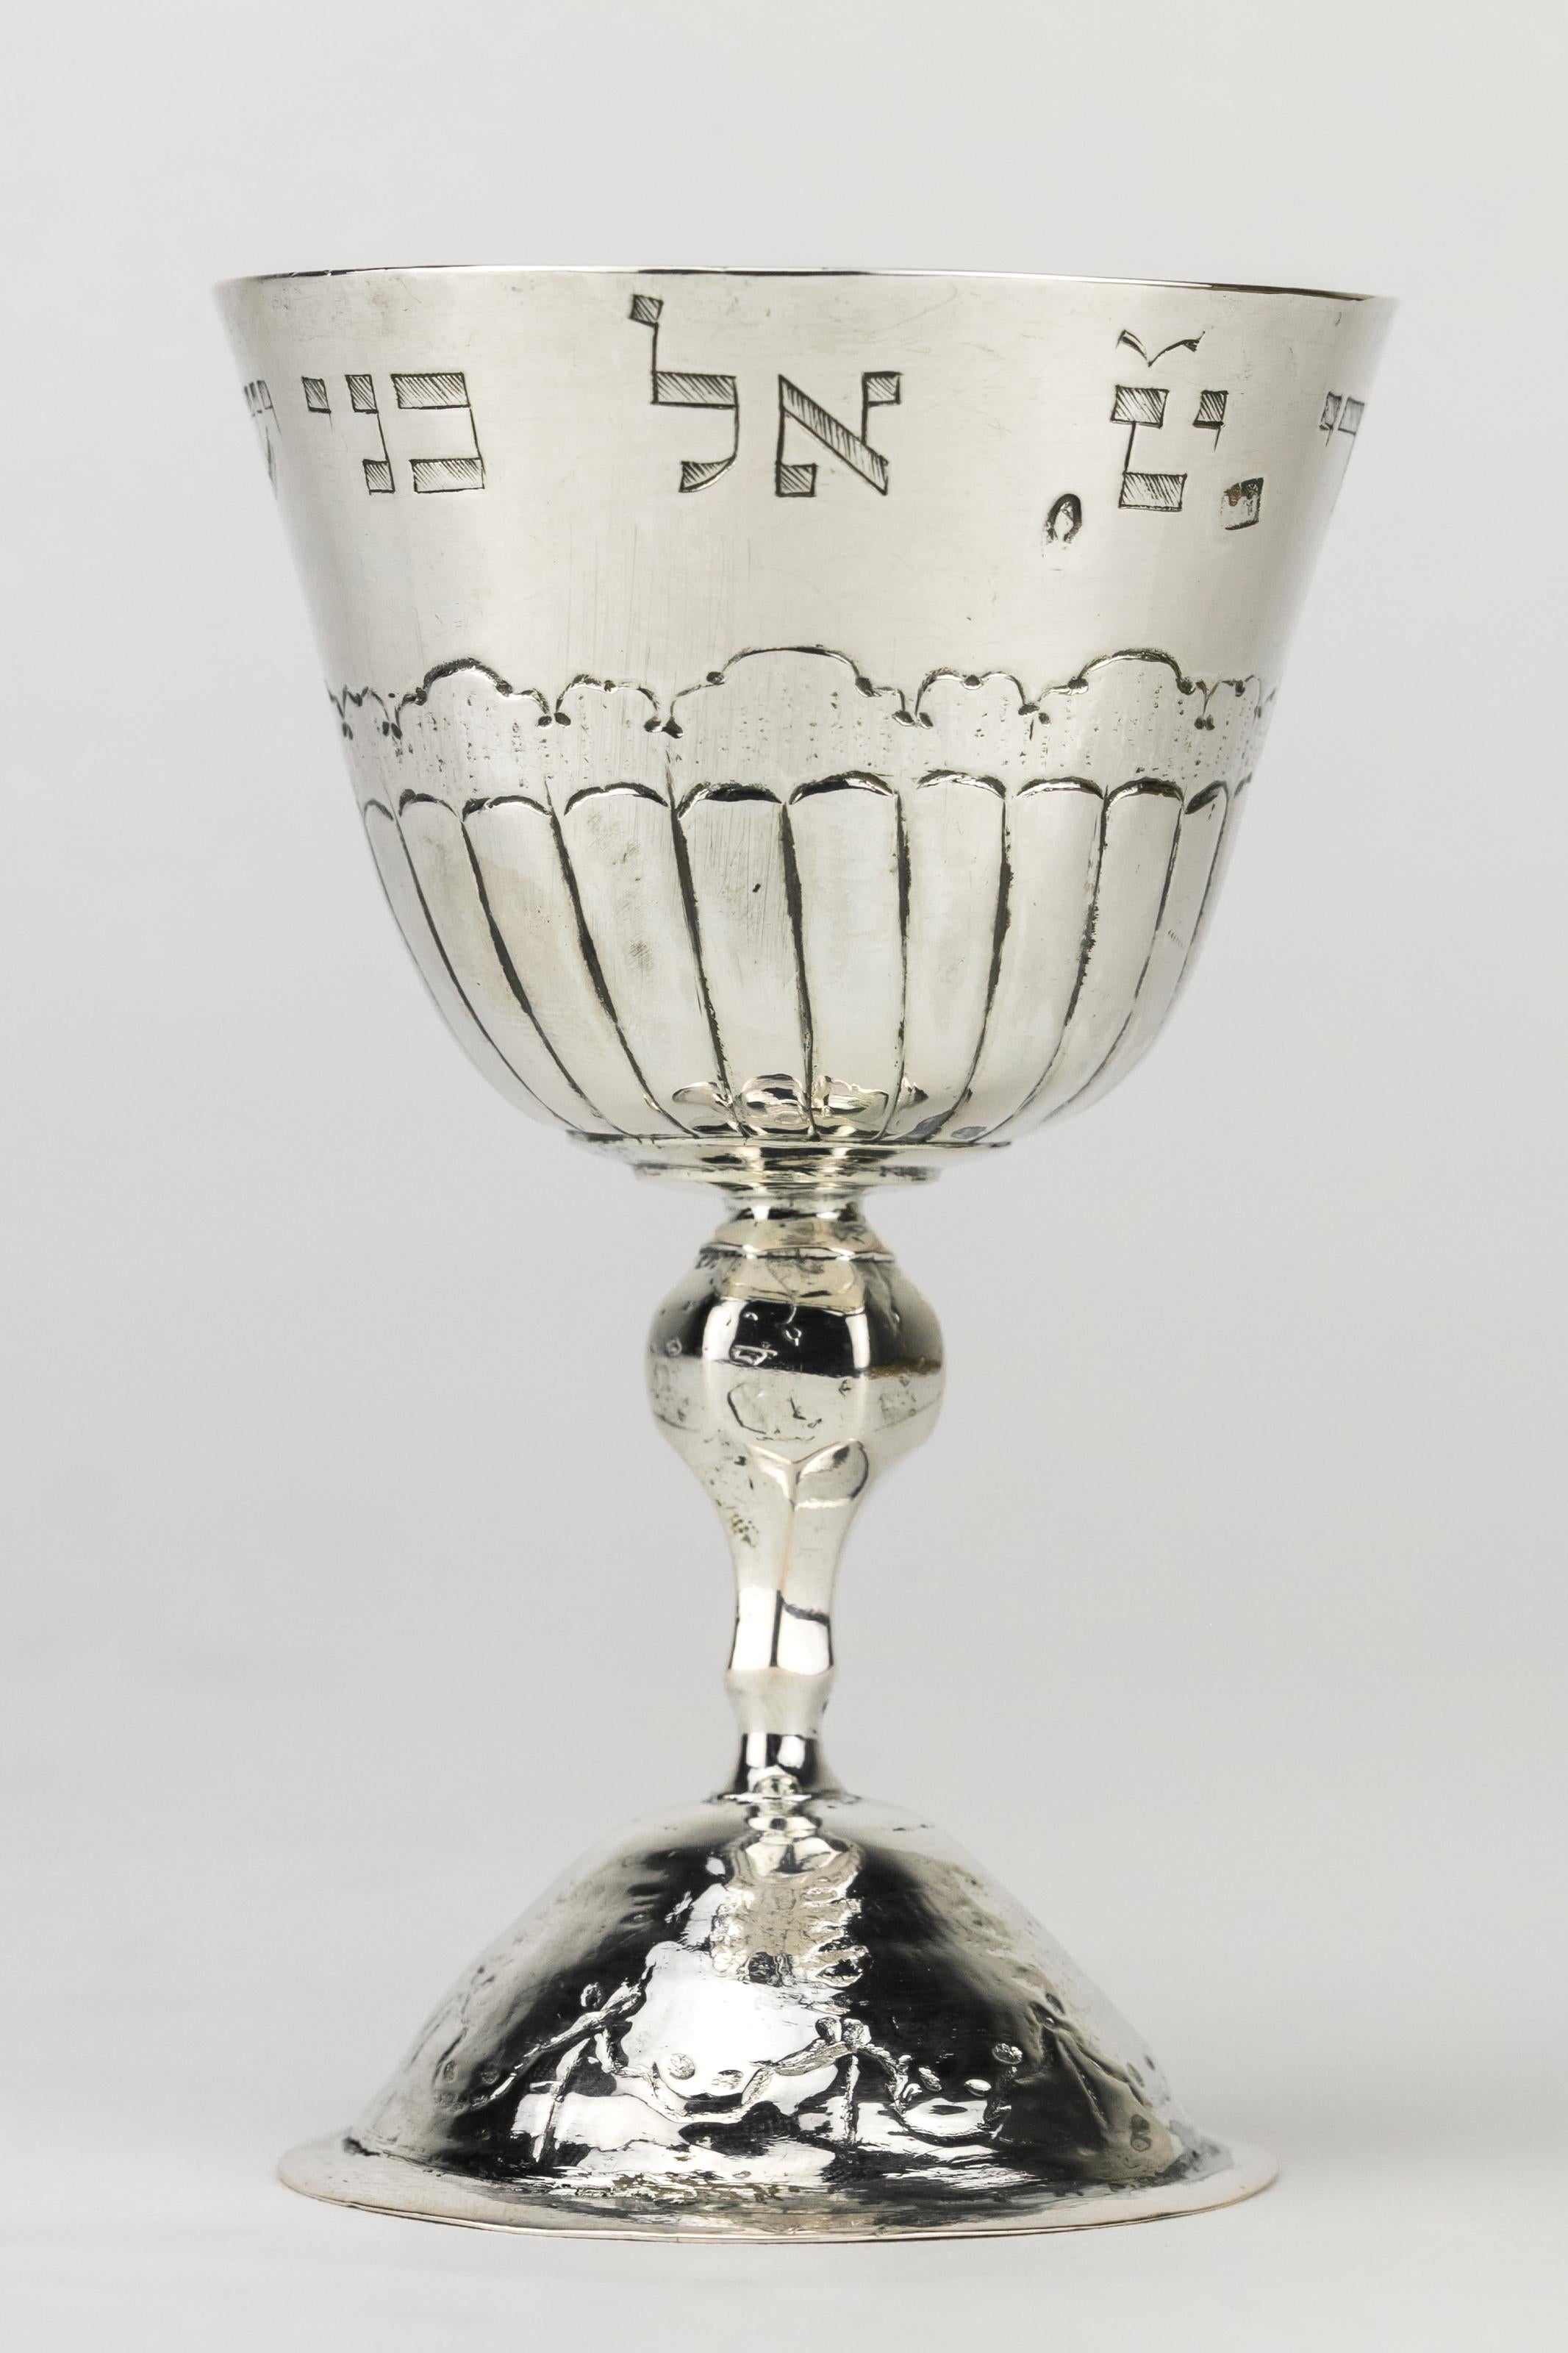 Silver Kiddush Goblet, Hieronymus Mittnacht, Augsburg, Germany, 1763-1765.
Classic style tulip-form bowl with chased scalloped design motif with faceted baluster stem set on circular base with coordinating chasing, Along the edge of the bowl the